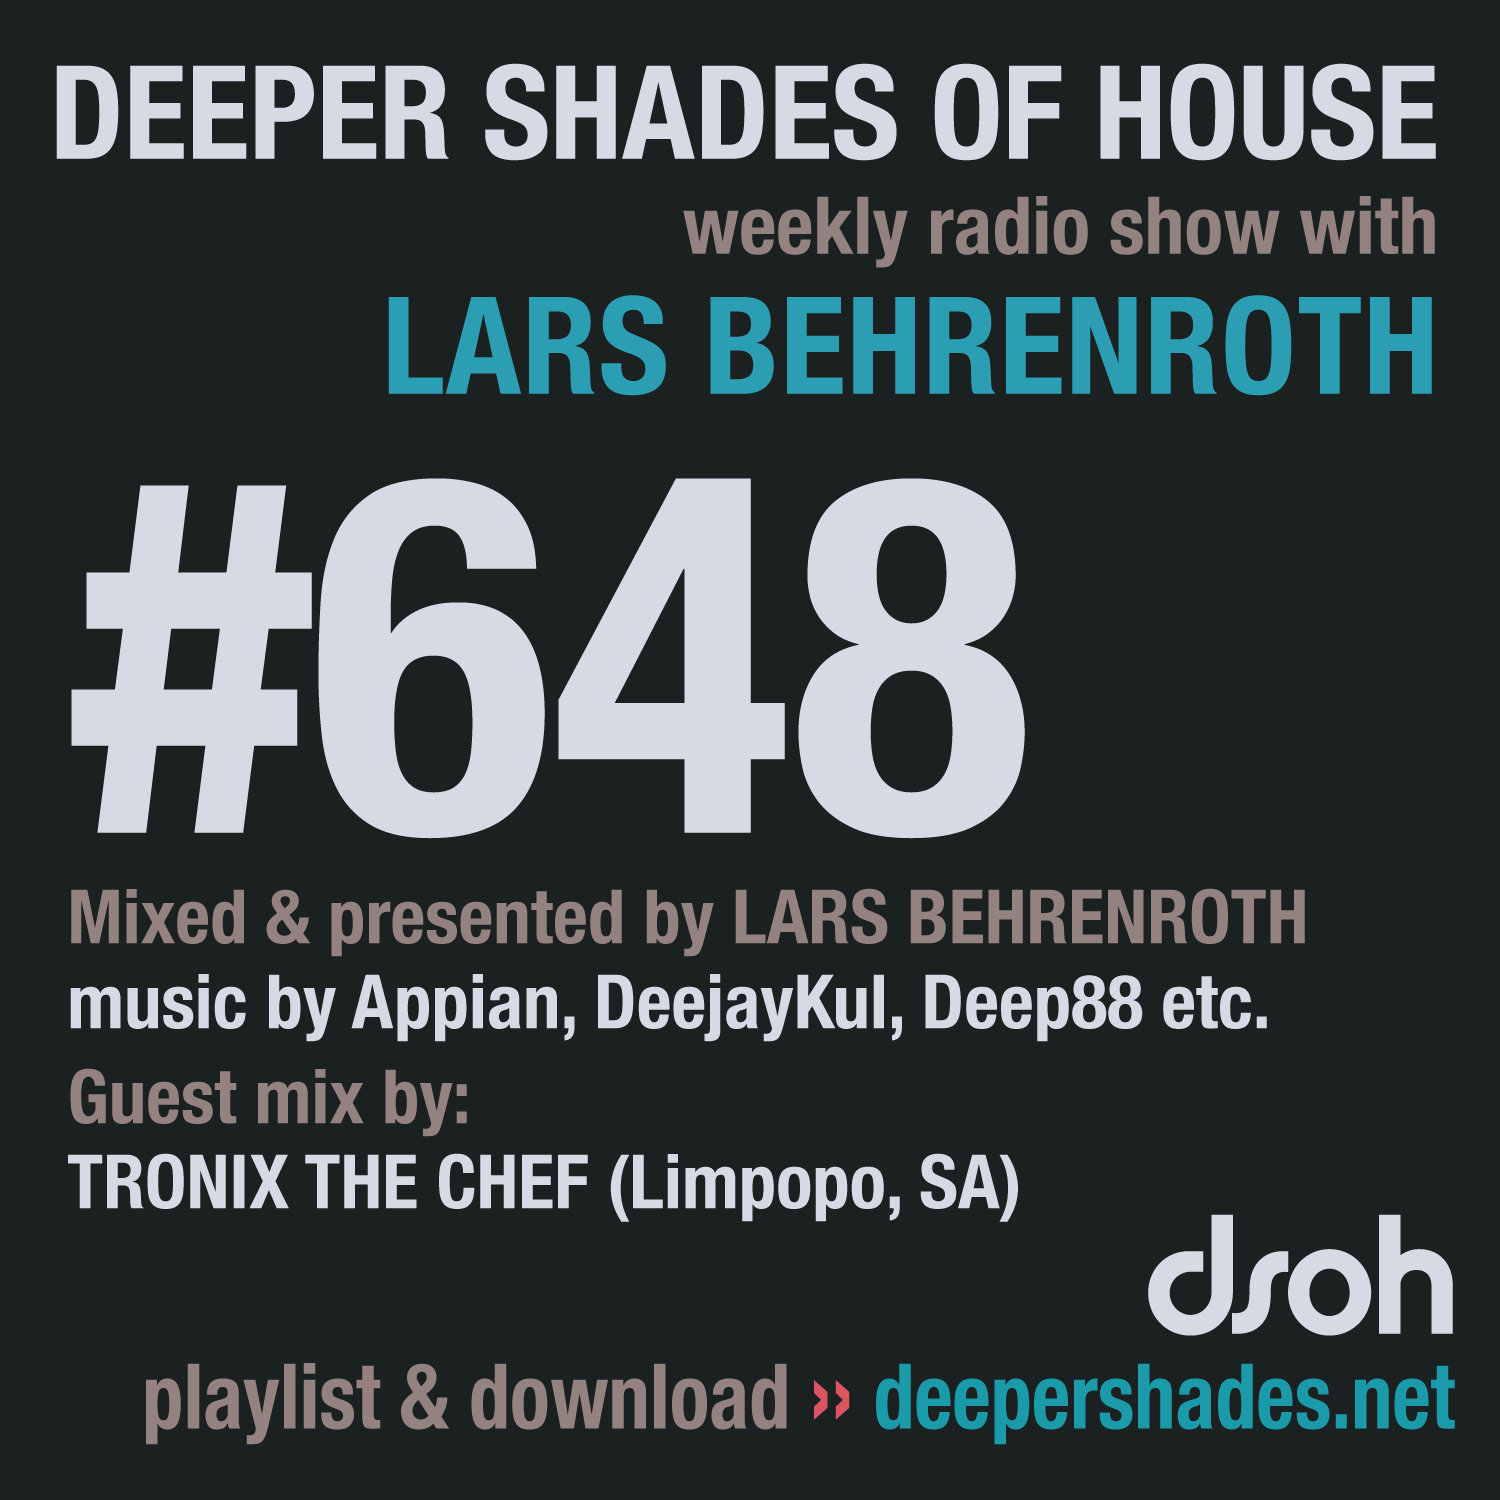 Deeper Shades Of House 648